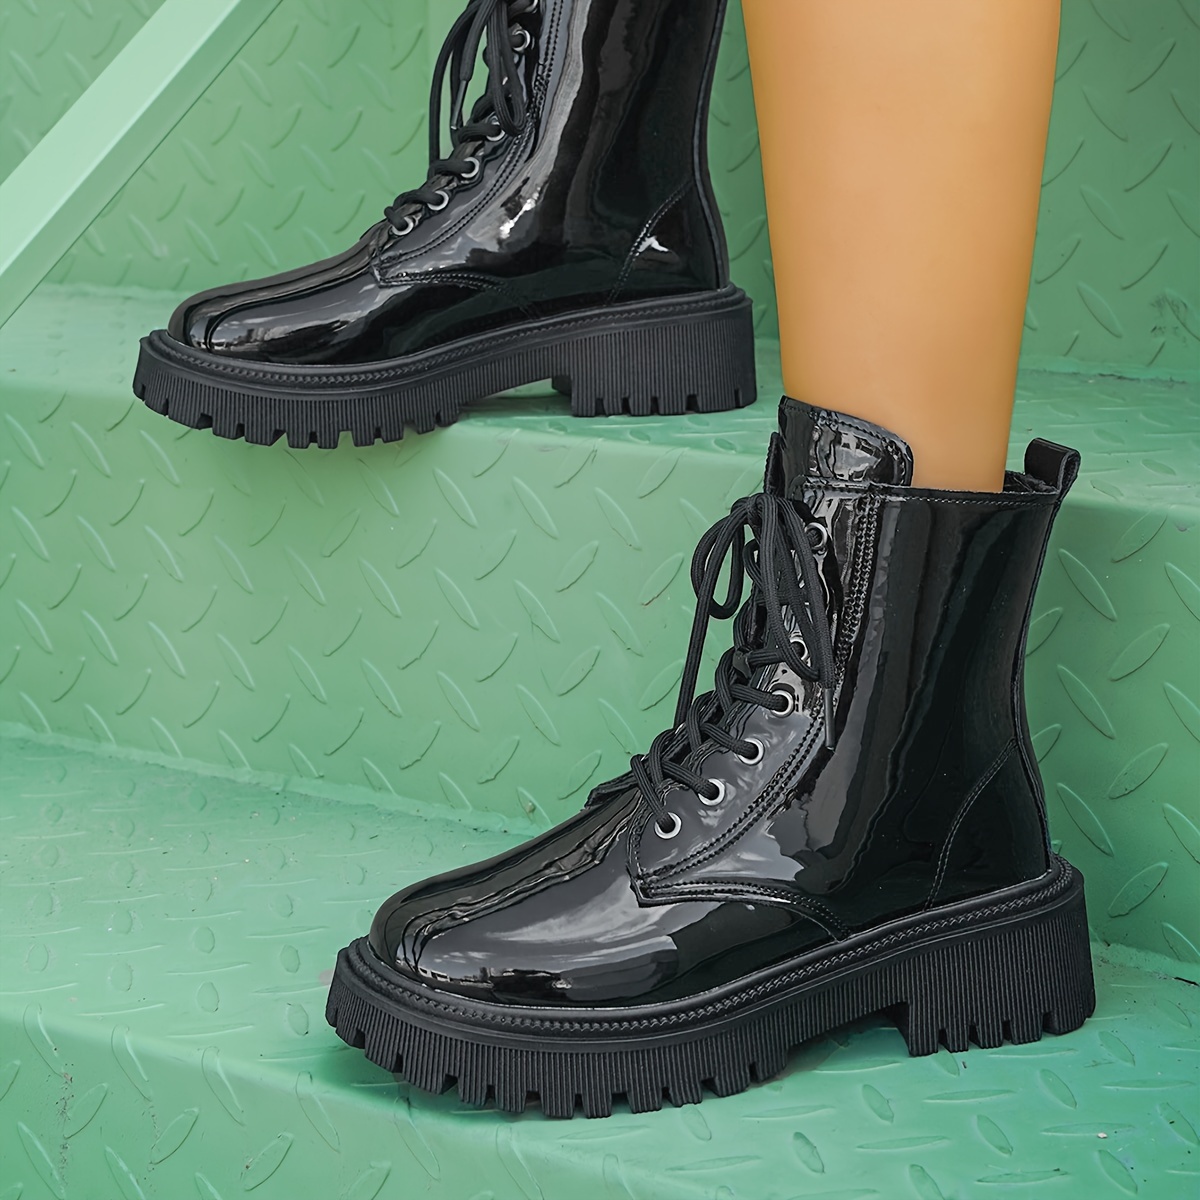 Women's Platform Combat Boots, Round Toe Lace Up Patent Leather Short  Boots, Fashion All-Match Side Zipper Boots